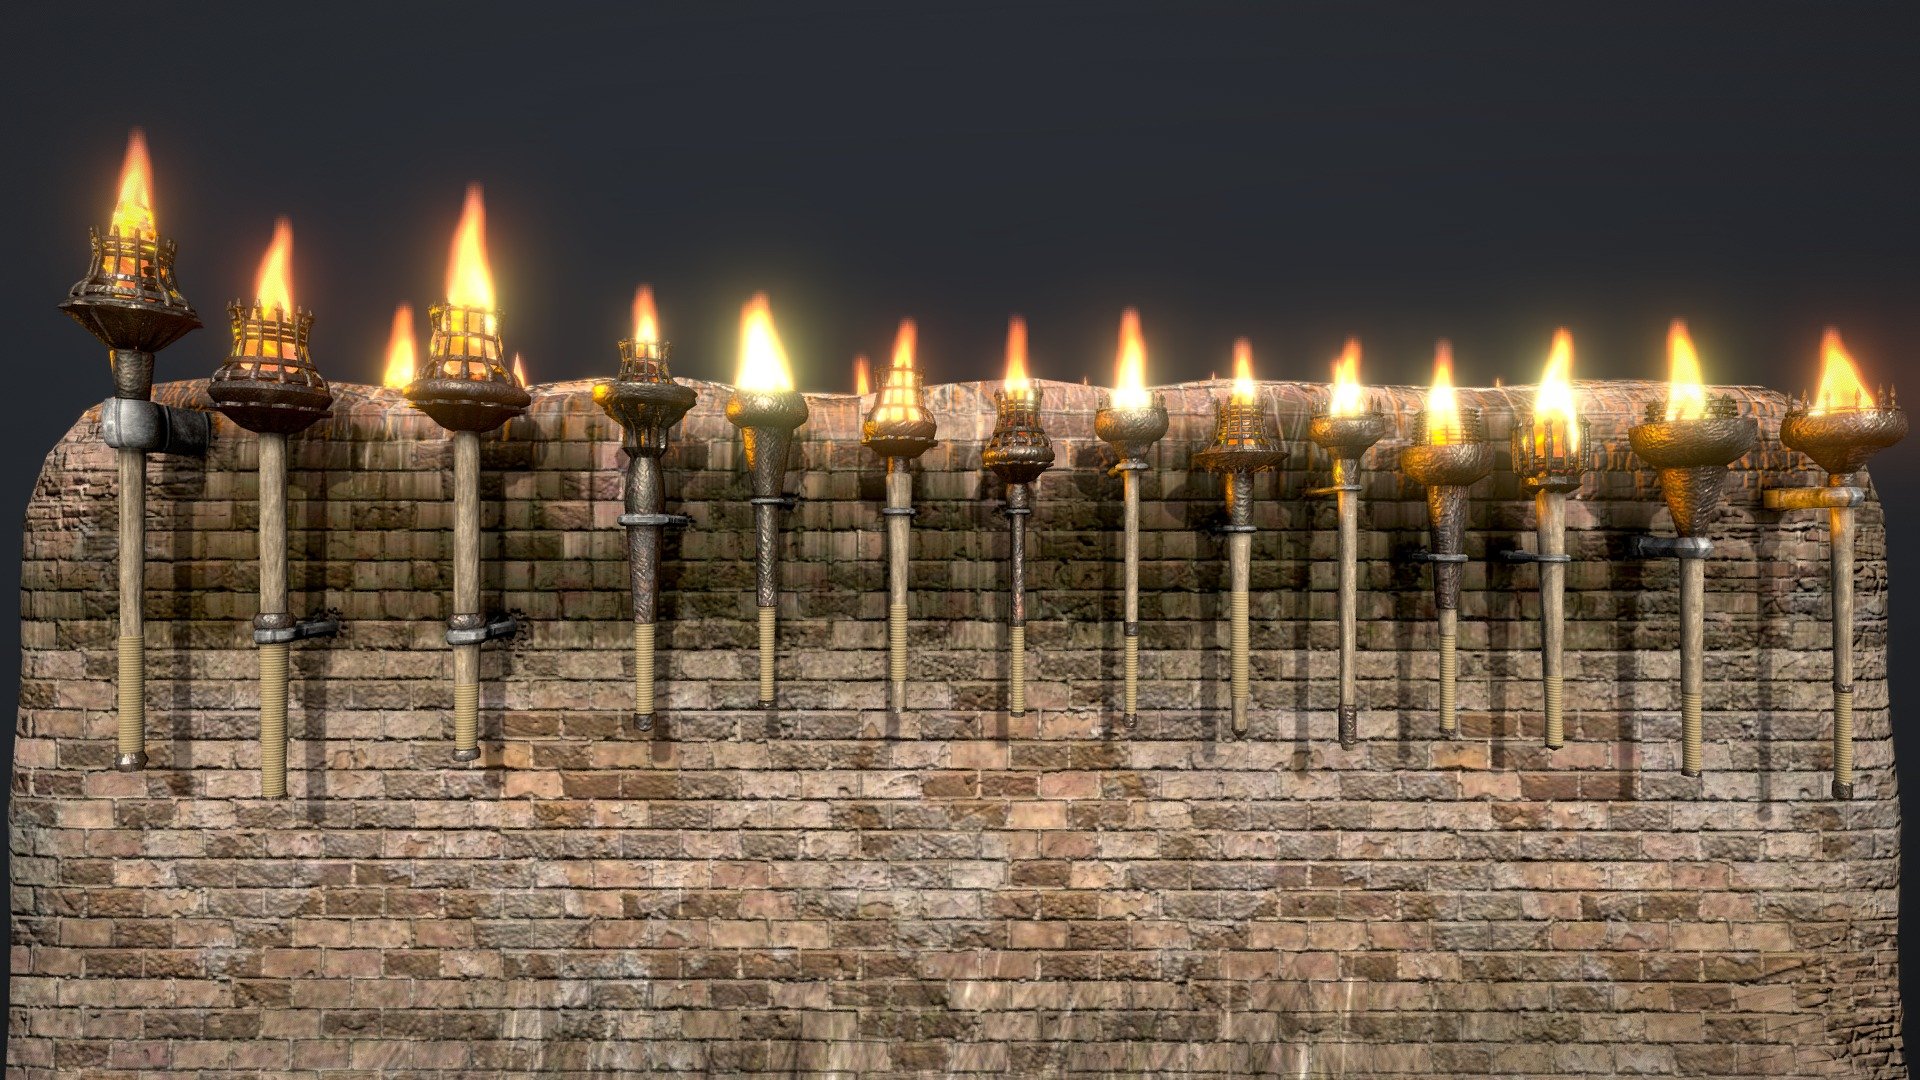 Model Info:



Materials — 7

Textures — 26

Resolution — 4096x4096 (jpg, png)

Download Size — 223MB




More Torches:



25-pack burning wall torches (1)

25-pack smoldering wall torches

Non-textured burning torches (animated): 1, 2, 3, 4




Used Softwares:



Blender (2.93 / 3.0 alpha)

Substance Painter 2021.1.1 (7.1.1)
 - 25-pack burning wall torches (2) - Download Free 3D model by Nortenko Dmytro (@leondp) 3d model